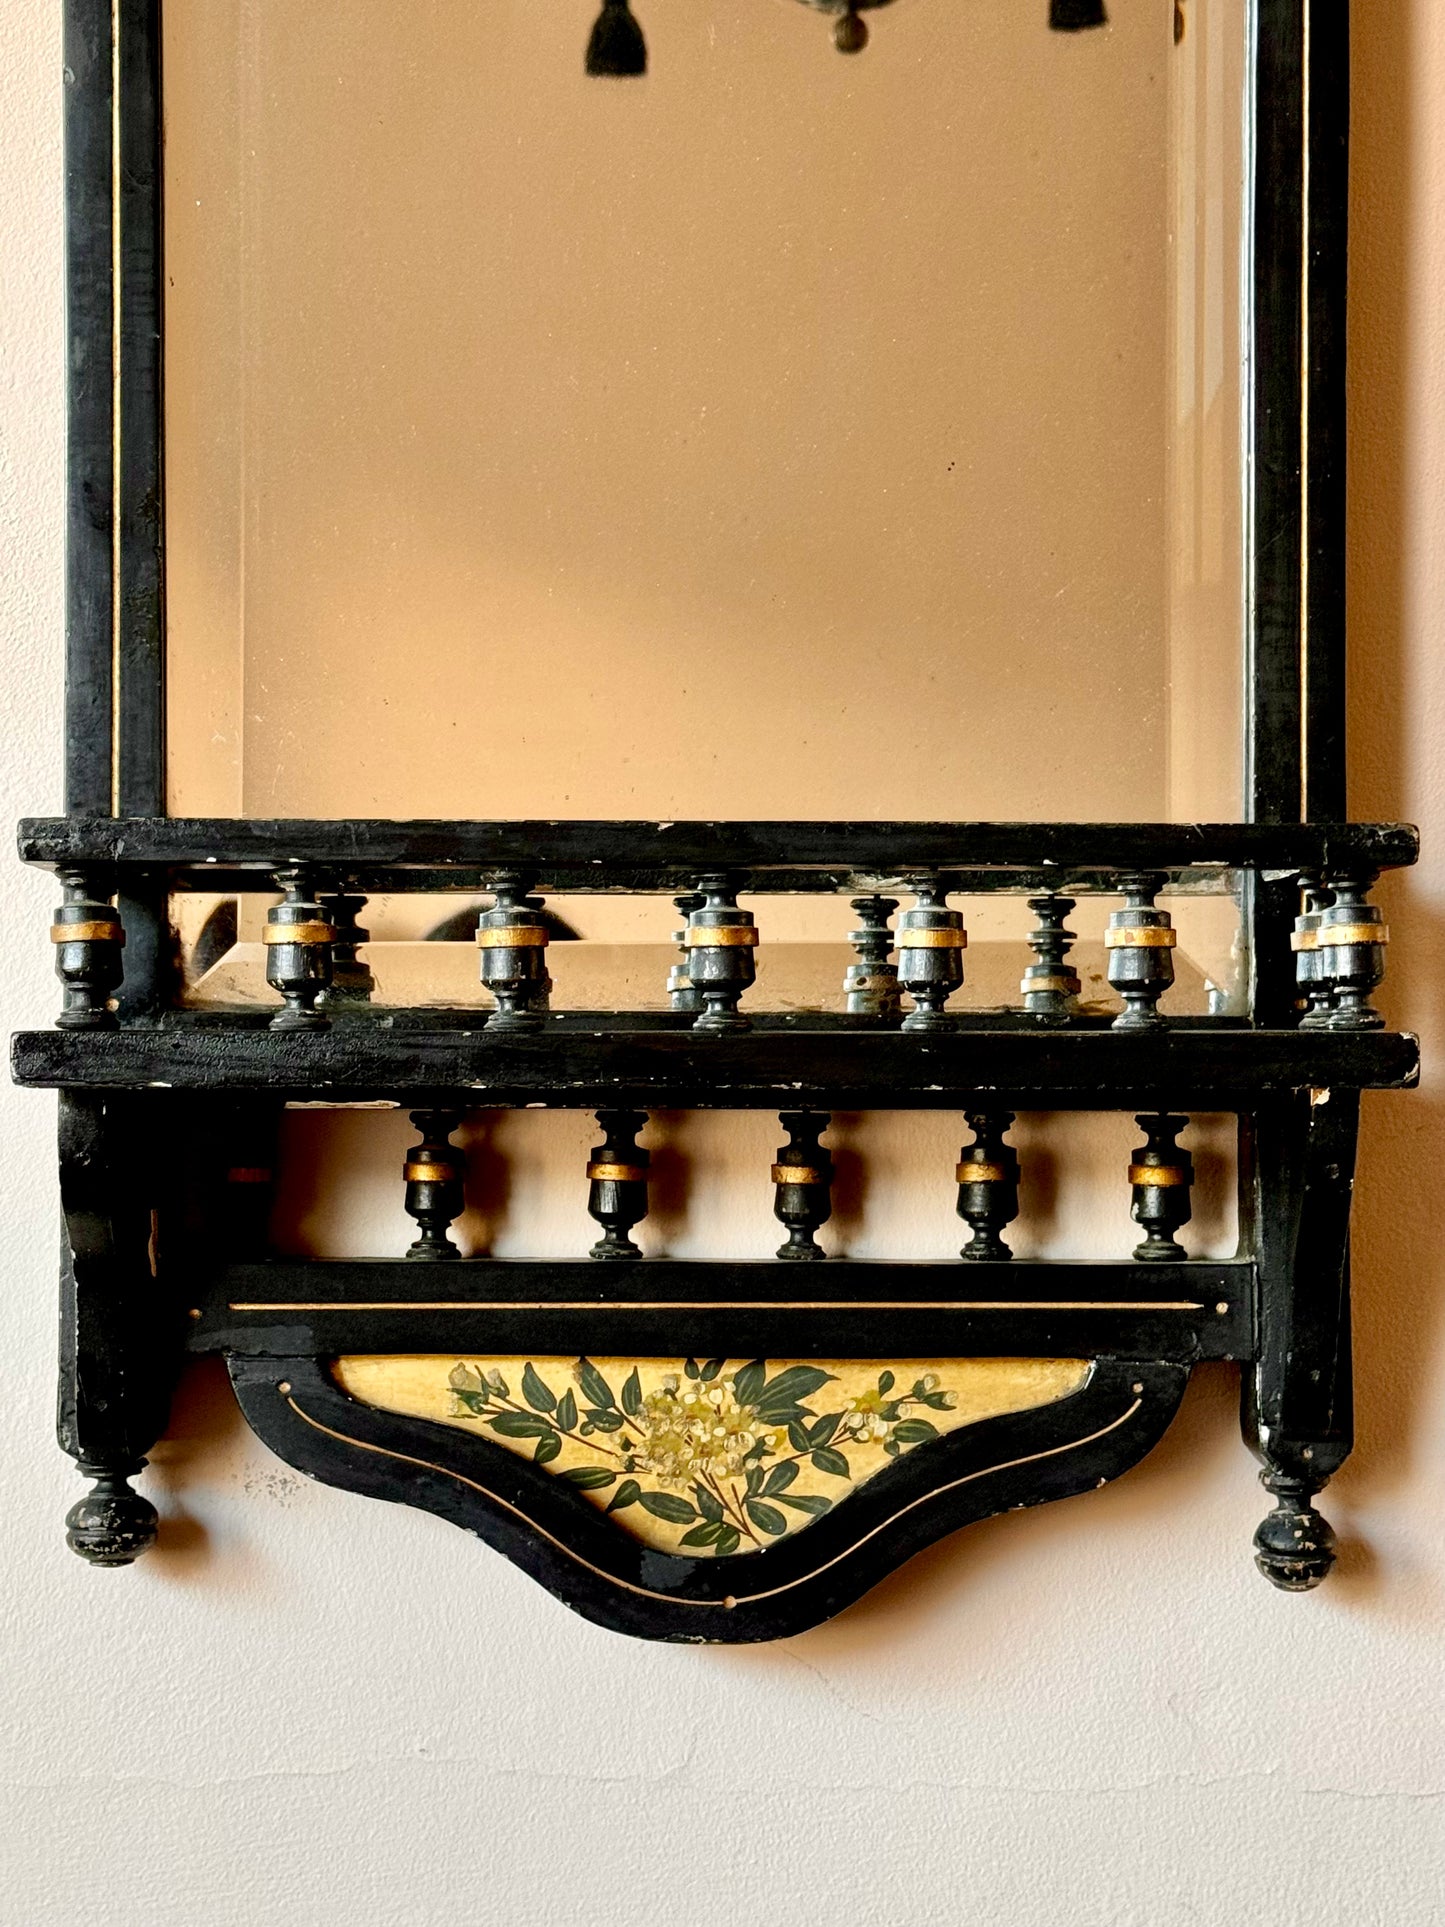 C19th Aesthetic Movement Lacquered Mirror